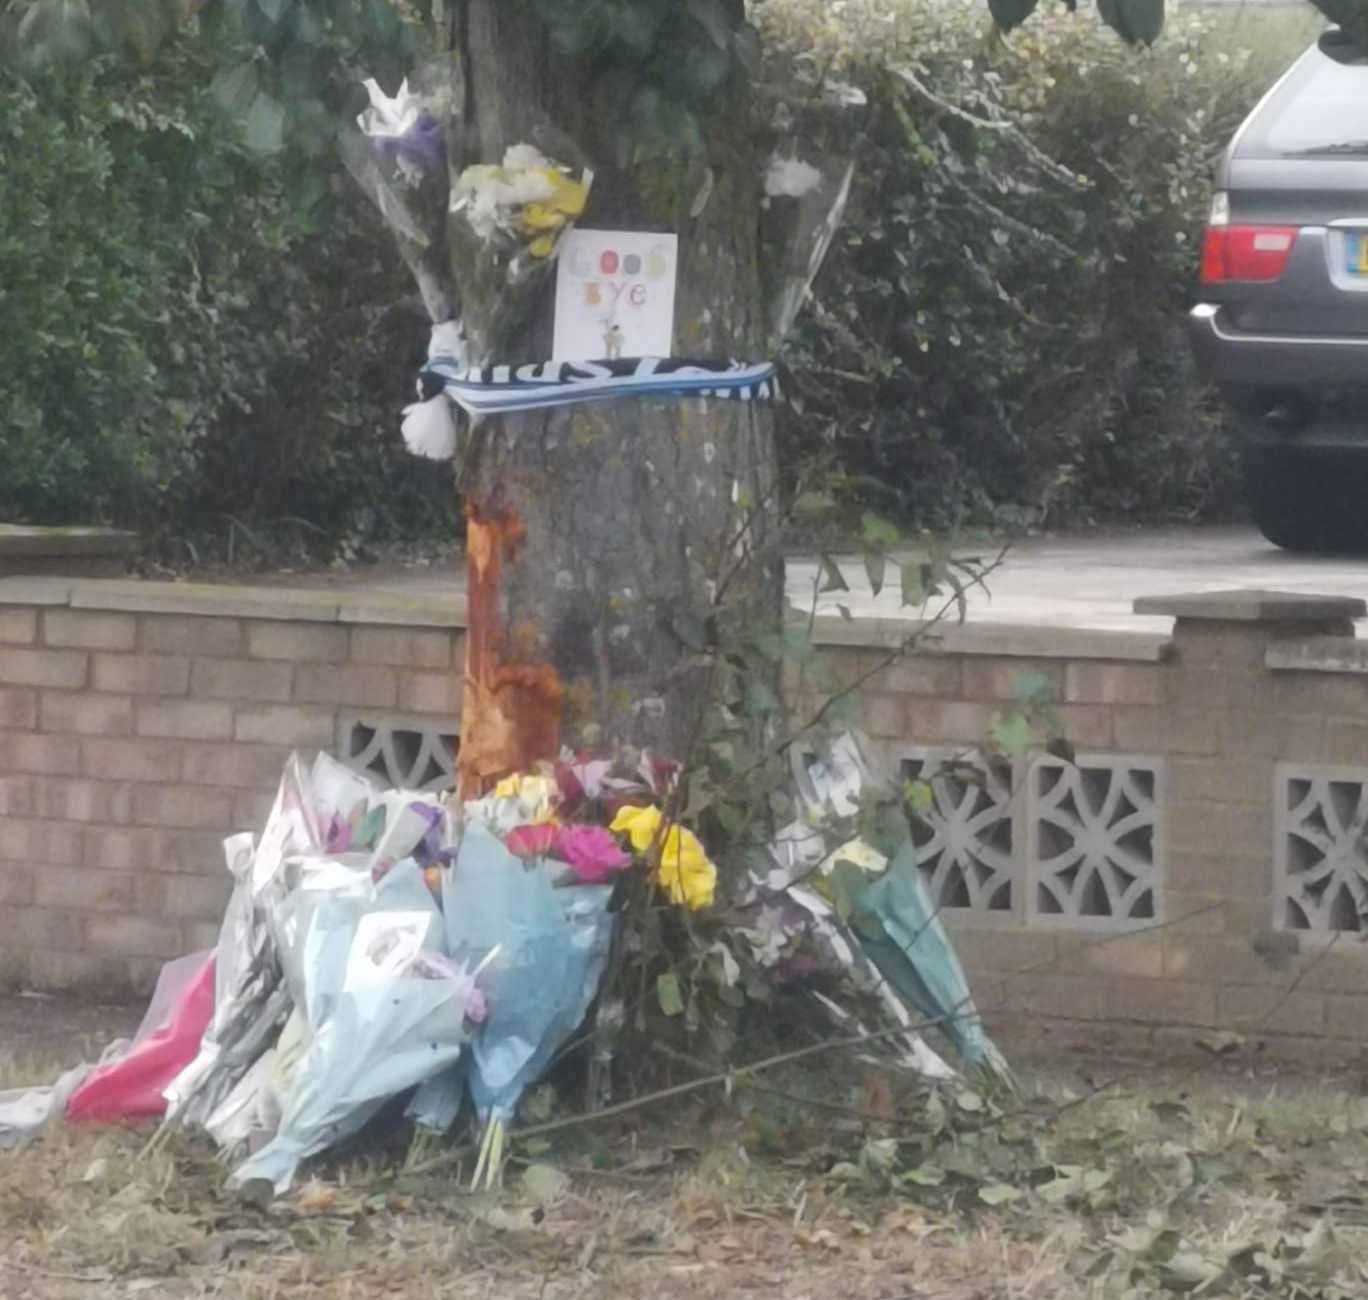 Floral tributes have been left at the scene of the fatal crash in Dumpton Park Drive, Broadstairs